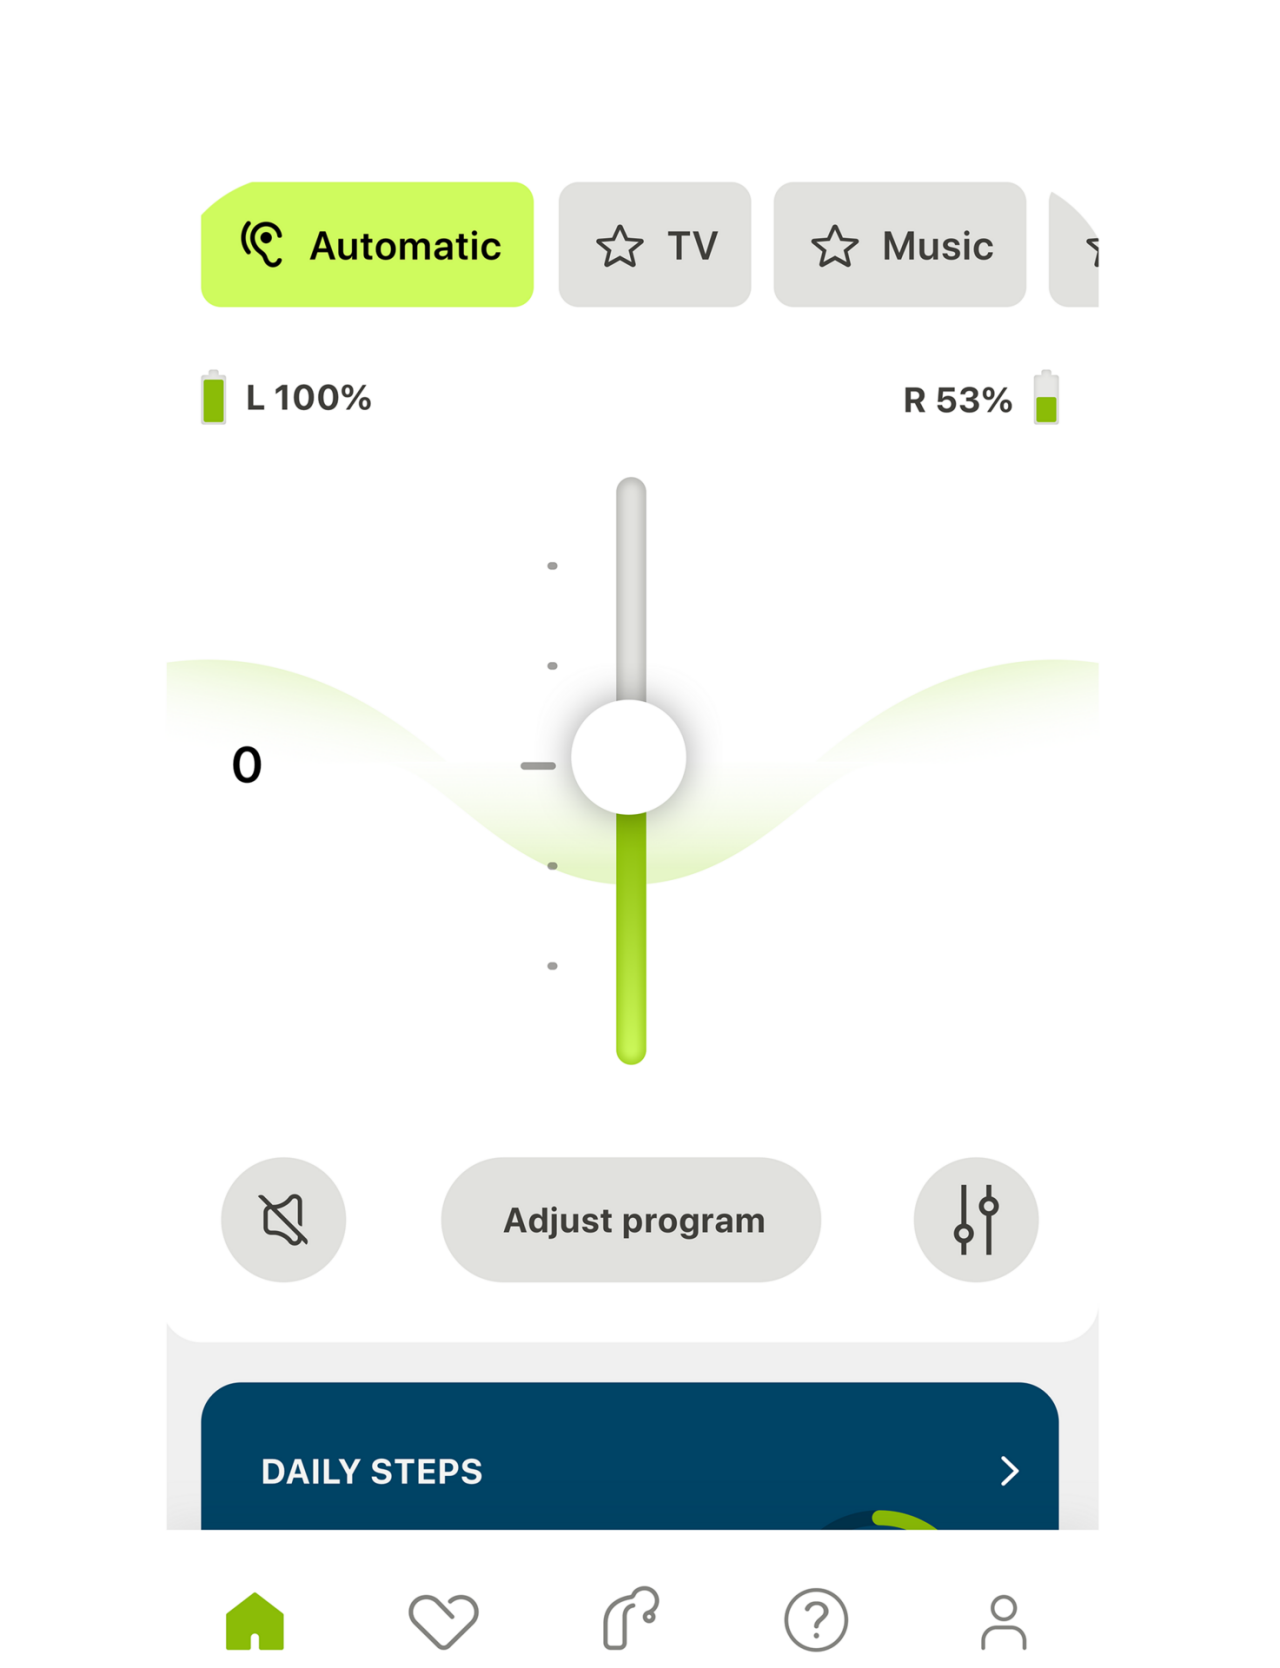 The myPhonak smartphone app screenshot shows volume controls and a step counter.